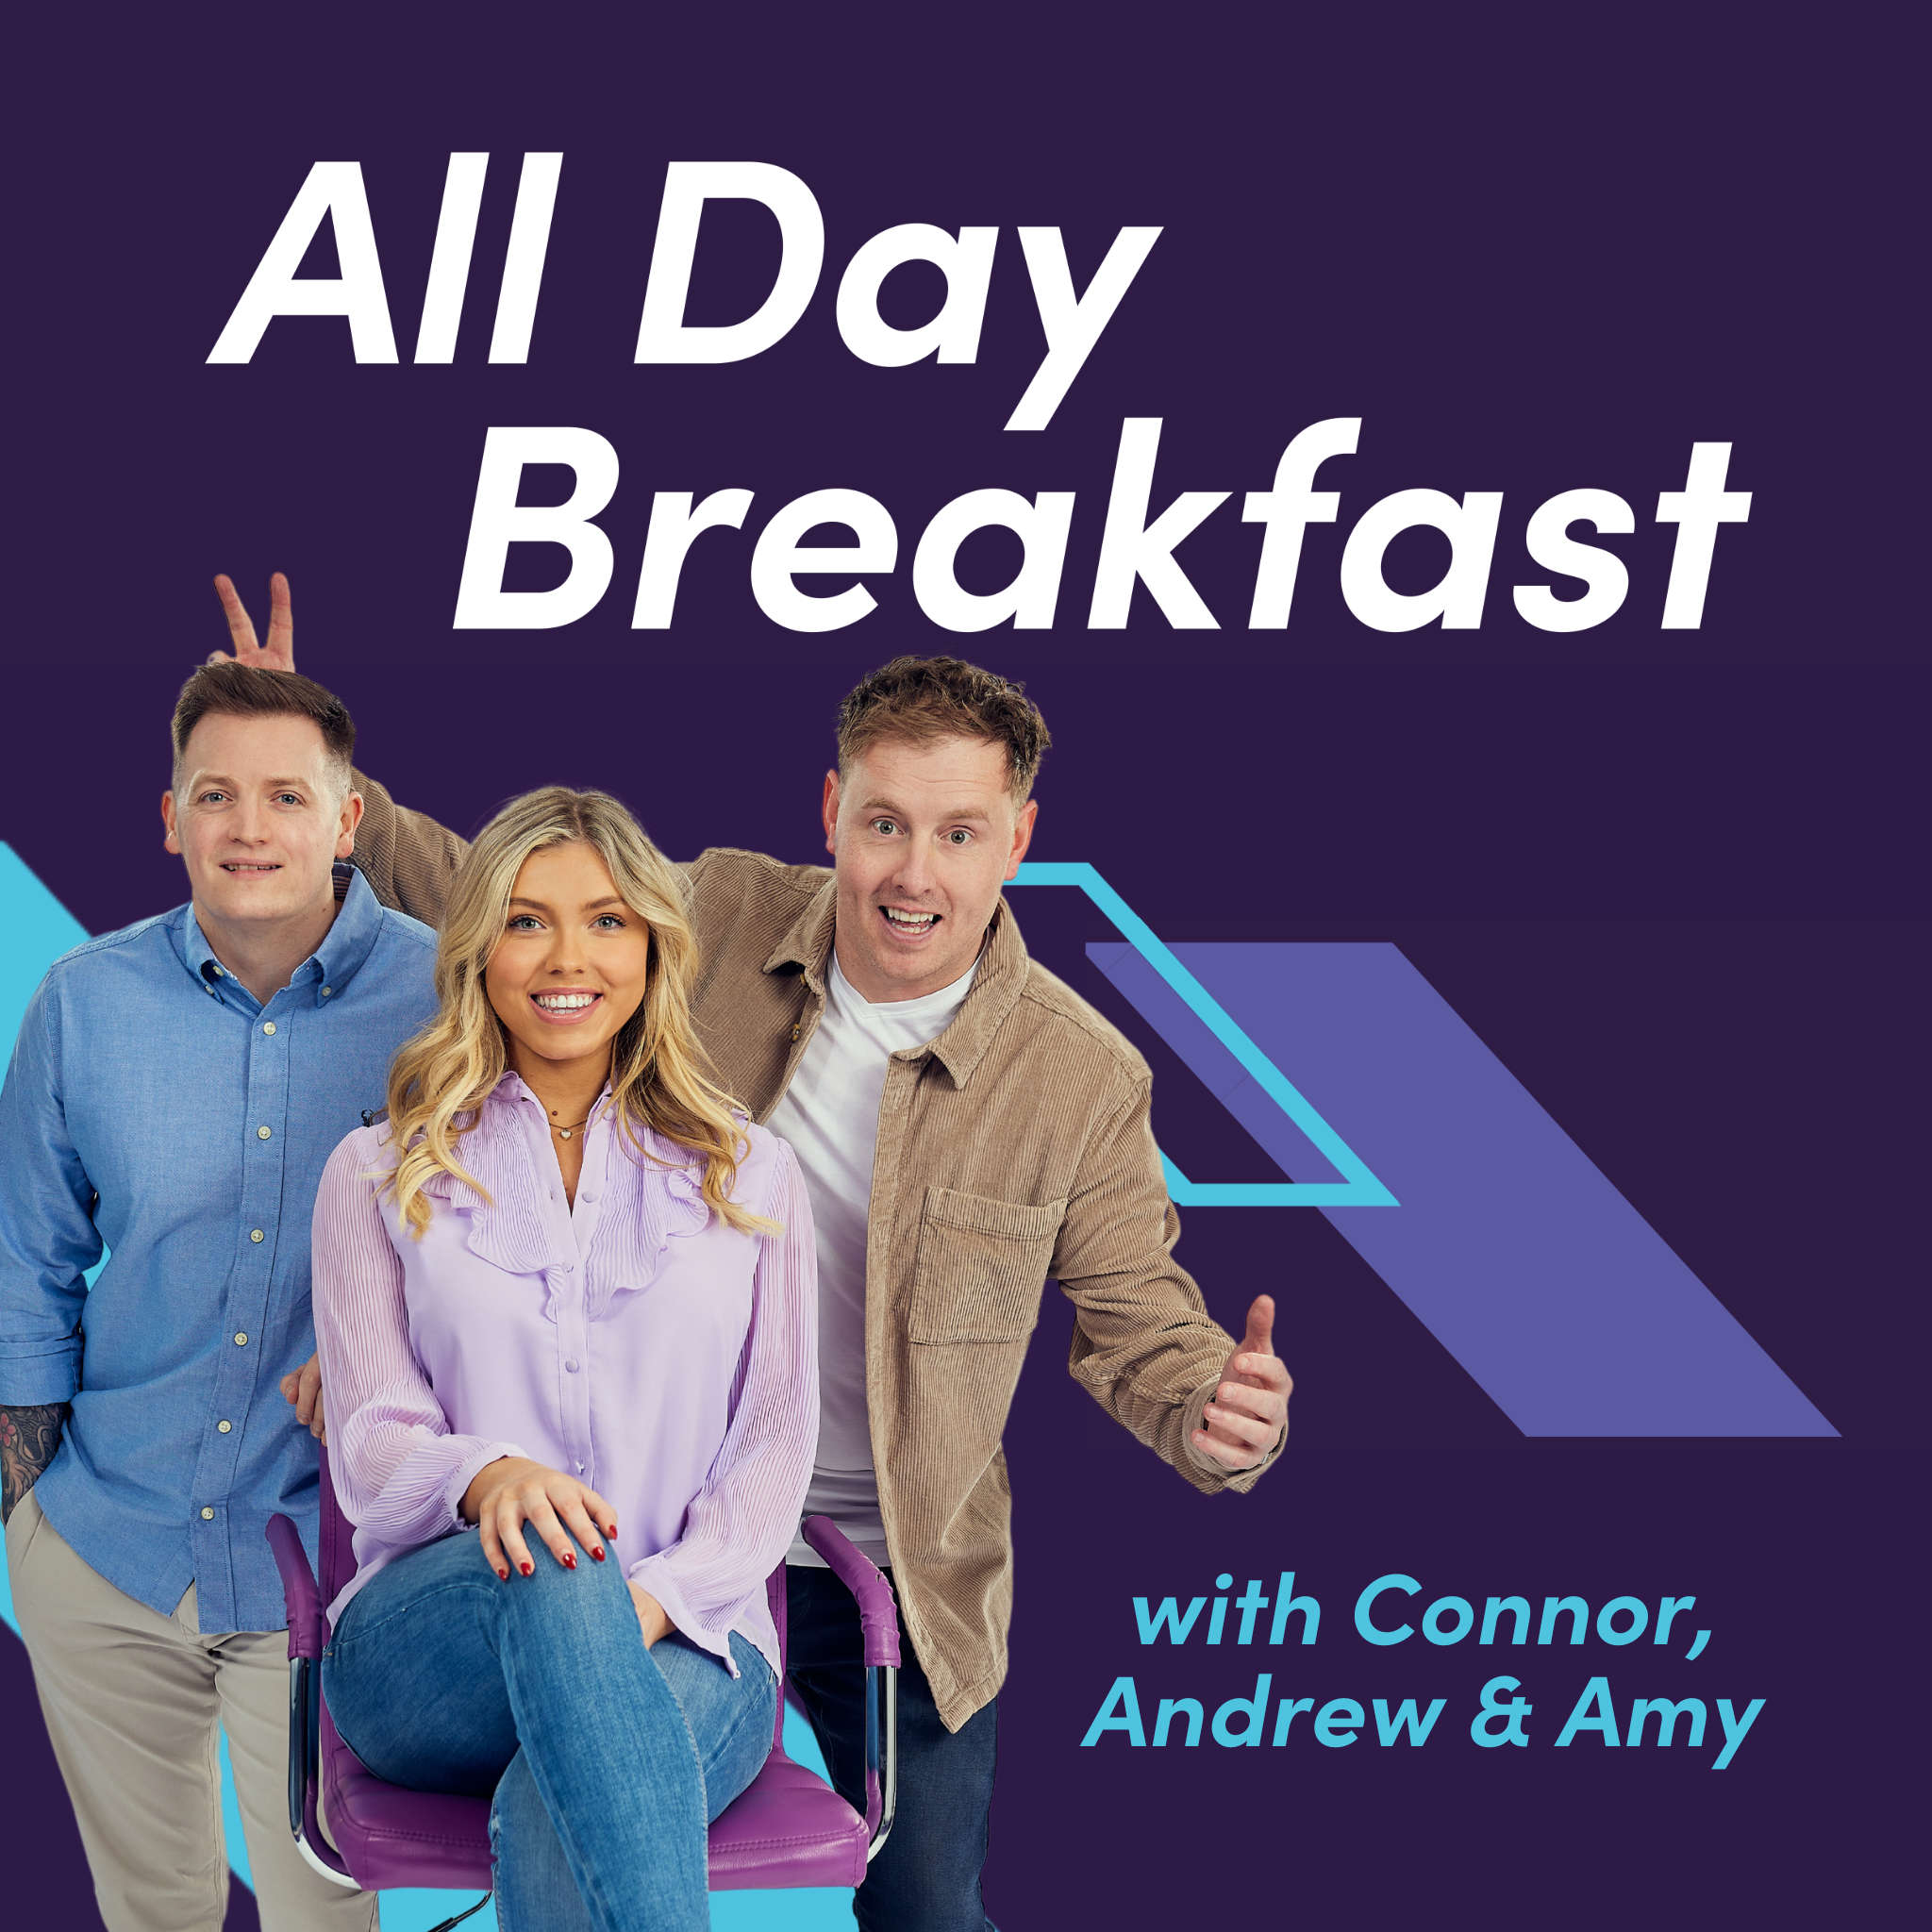 All Day Breakfast With Connor, Andrew & Amy.